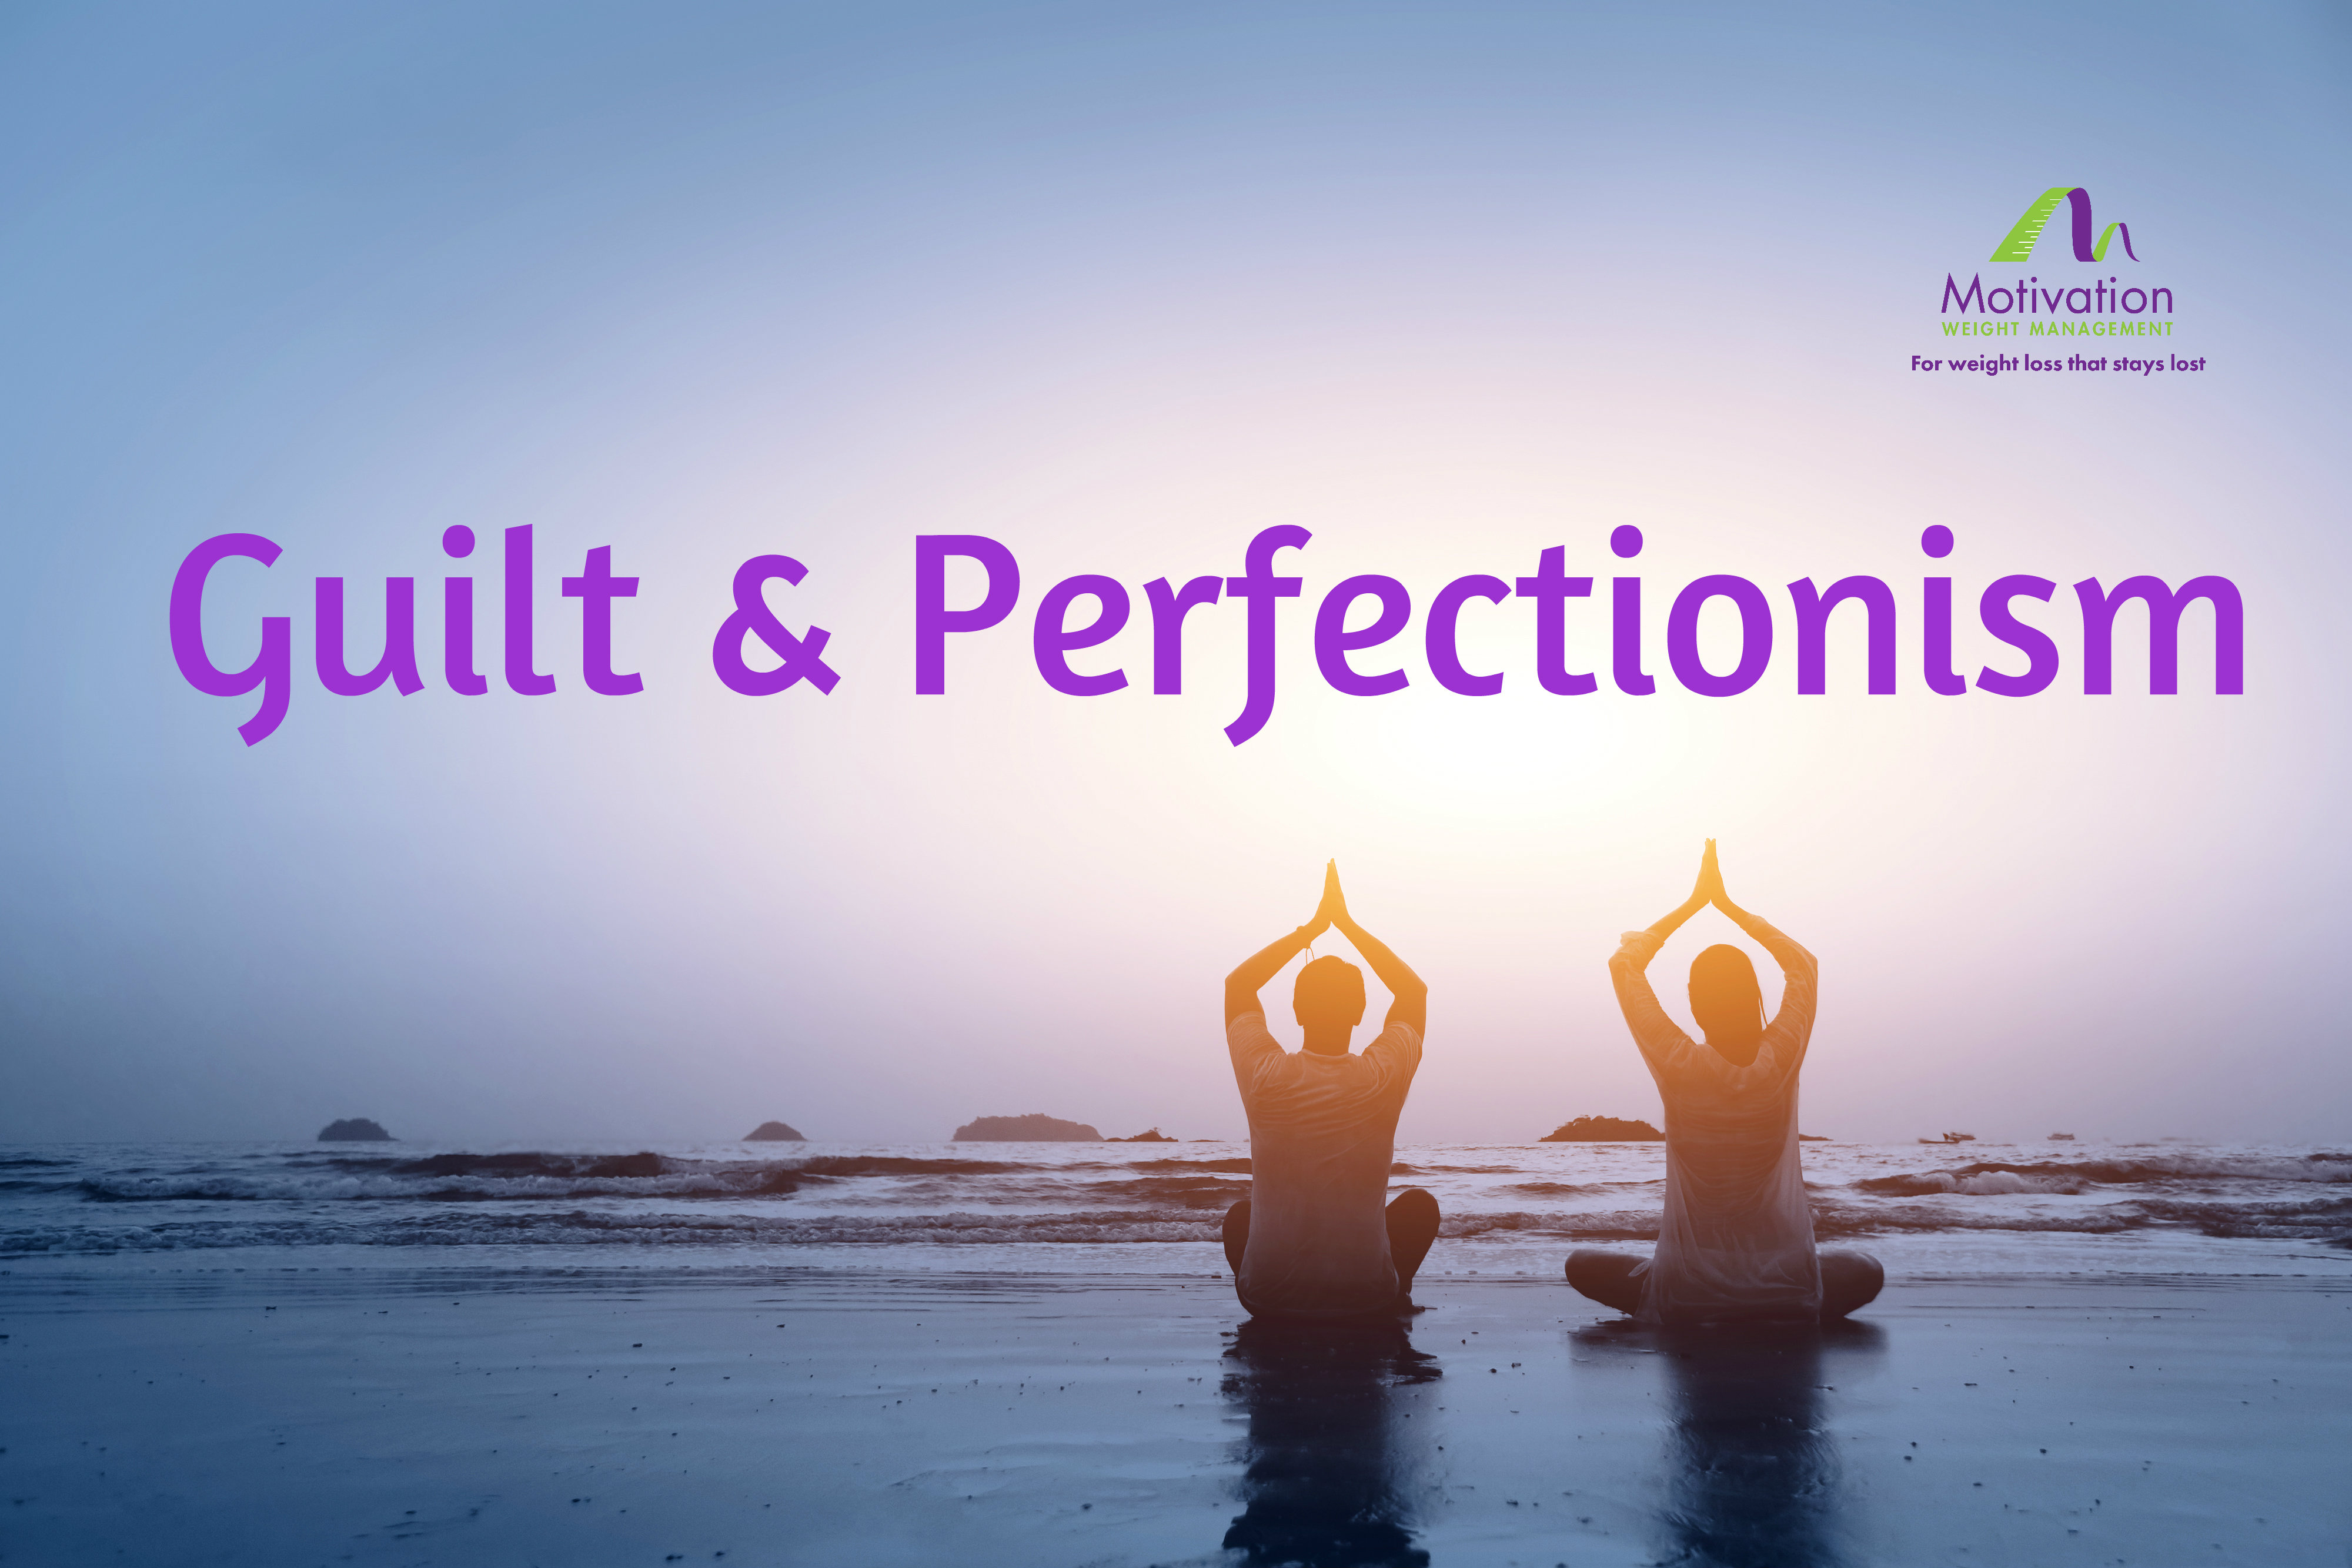 Day 21 Guilt & Perfectionism